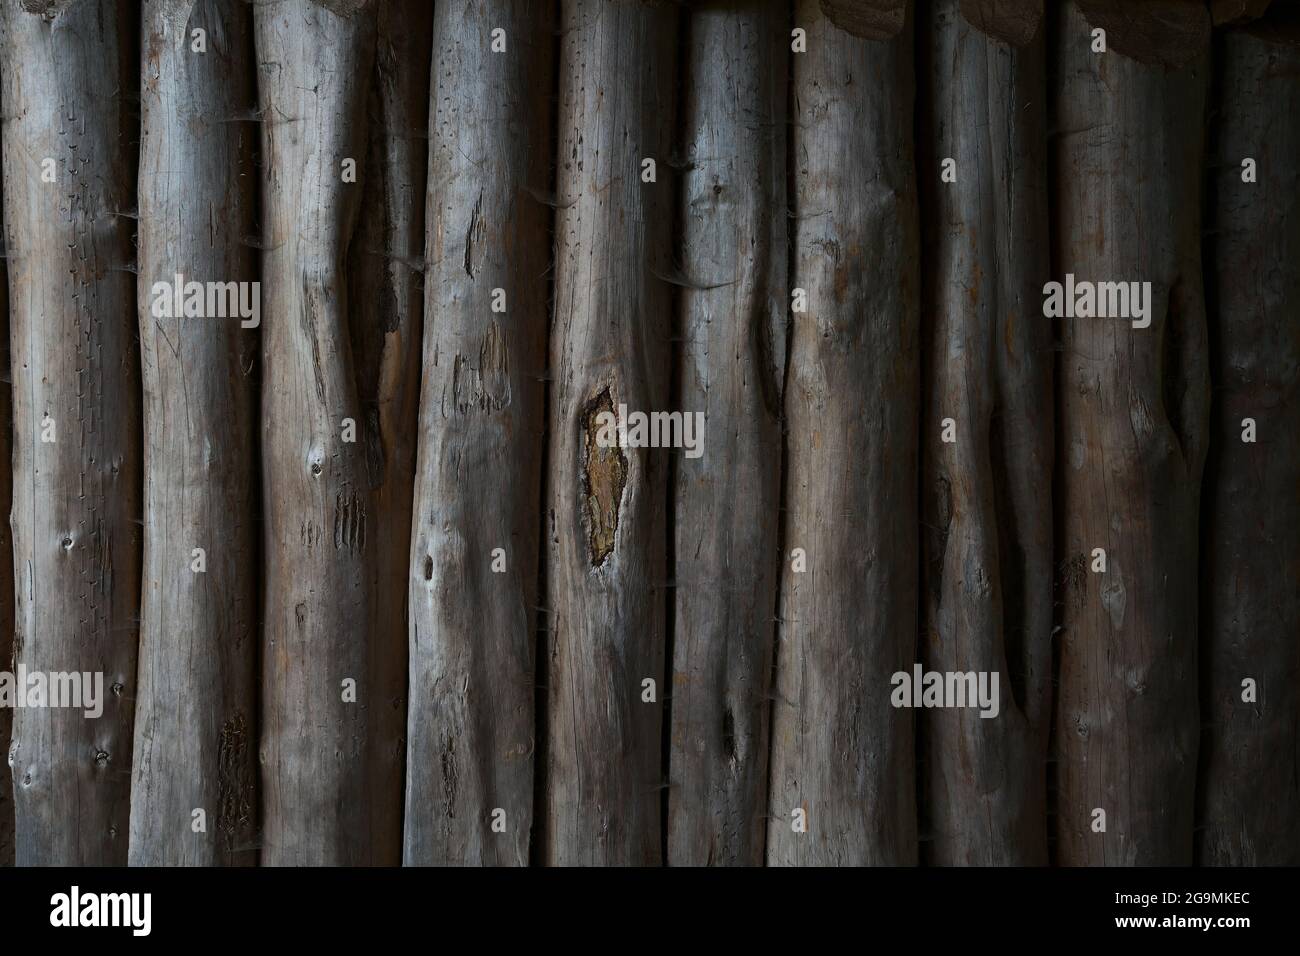 wall from round wood palisades, full frame background texture, architecture concept, copy space, selected focus Stock Photo